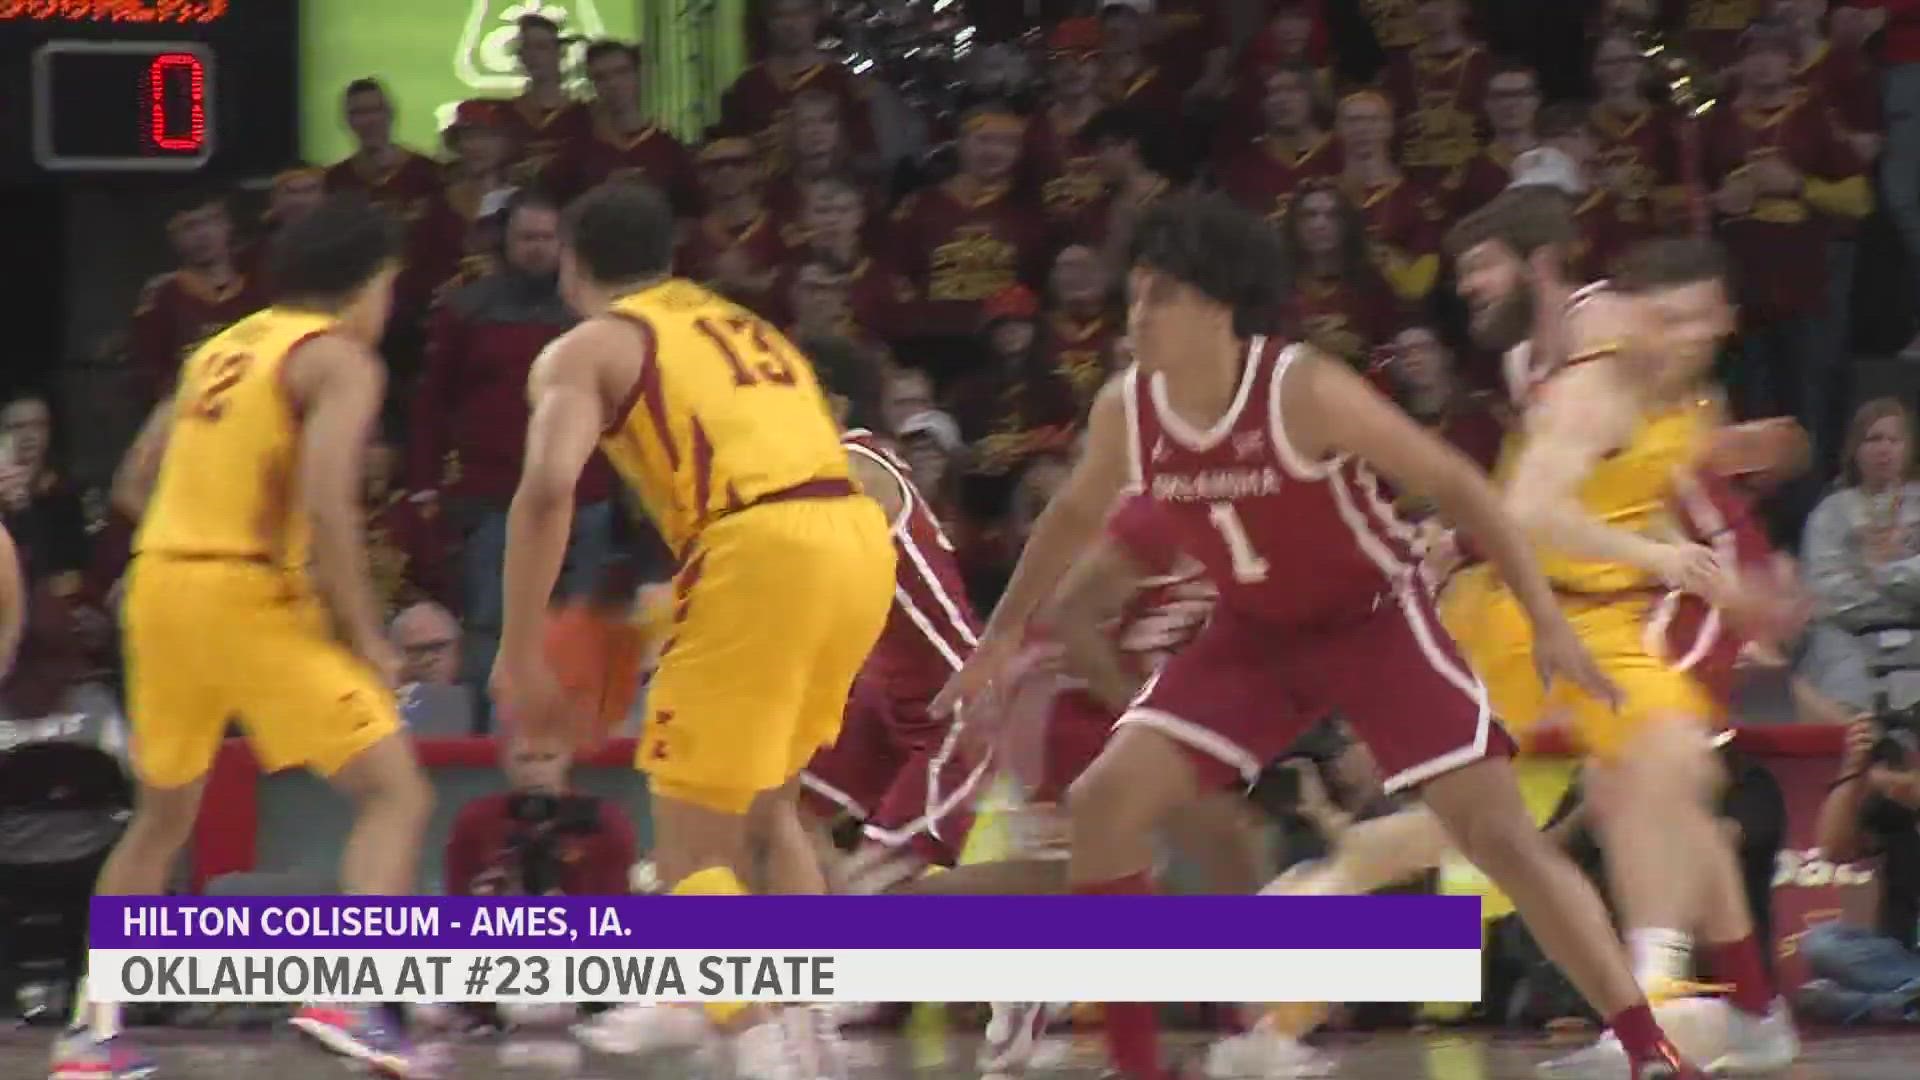 Iowa State has now lost five of its last six while trying to secure an NCAA Tournament berth.